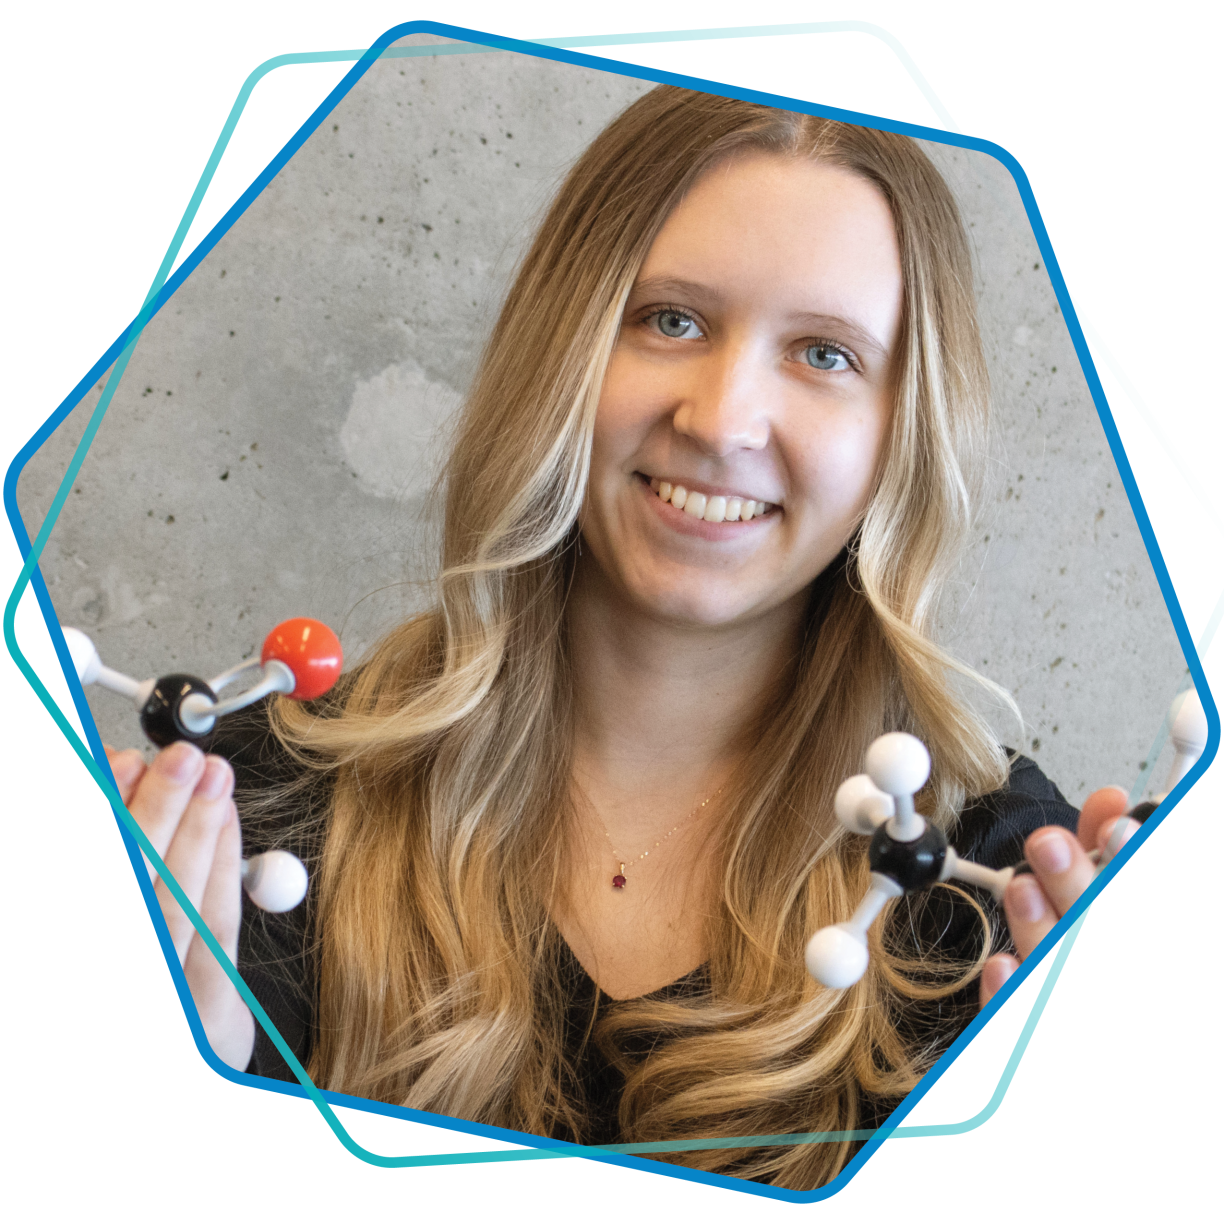 A smiling young woman holding models of cellular structures.